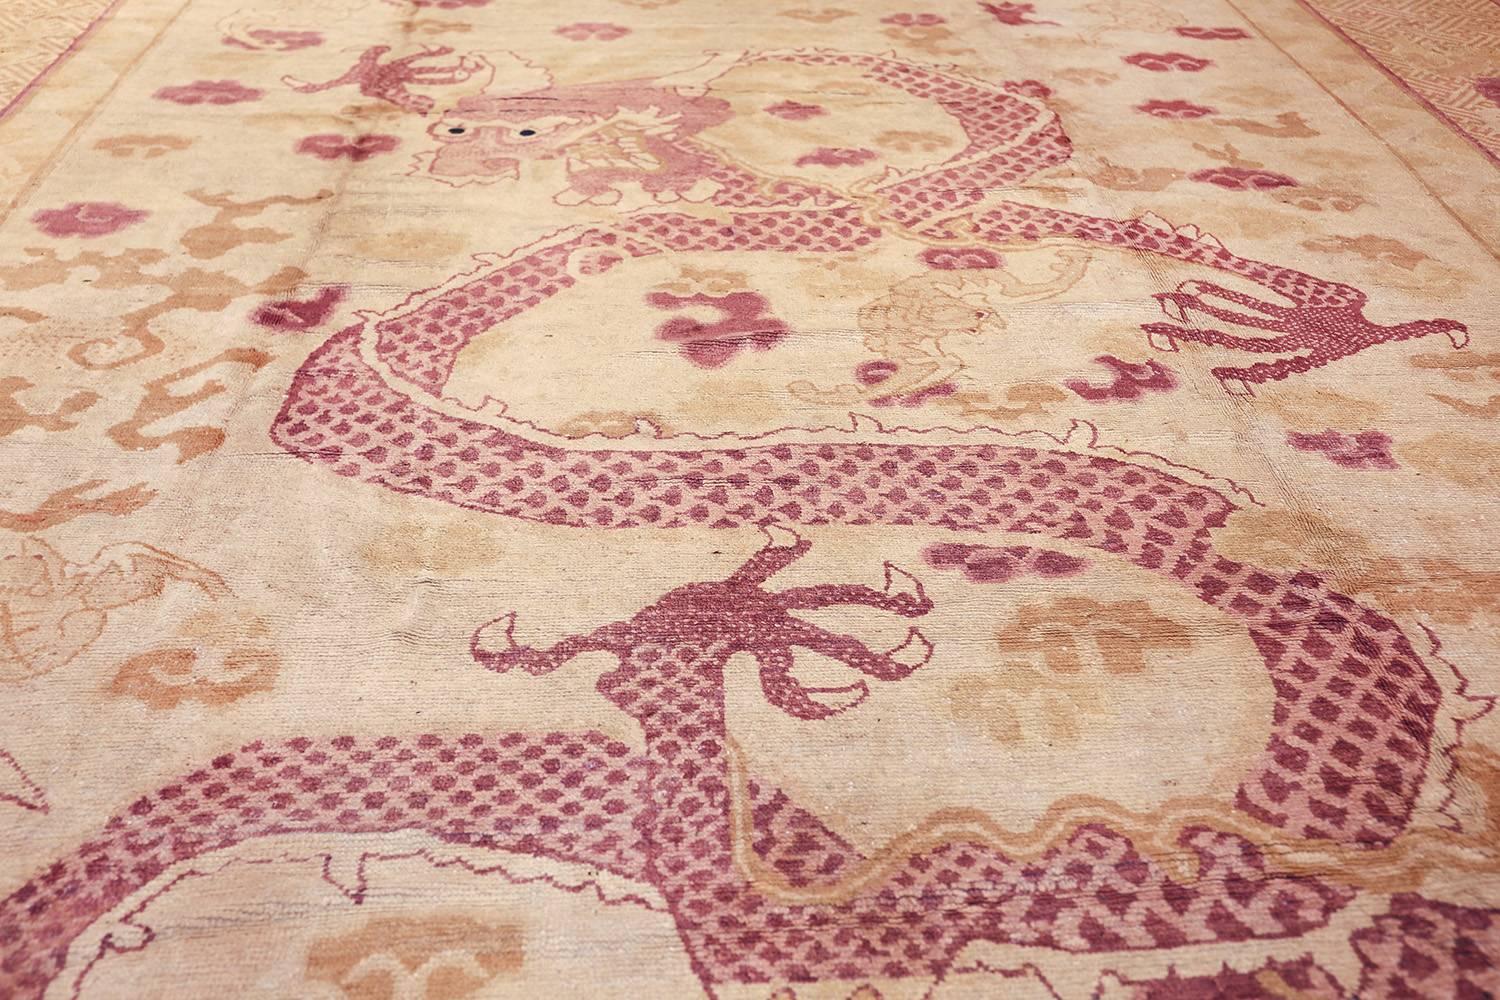 Hand-Knotted Funky Antique Purple Chinese Dragon Design Rug. Size: 11 ft x 14 ft